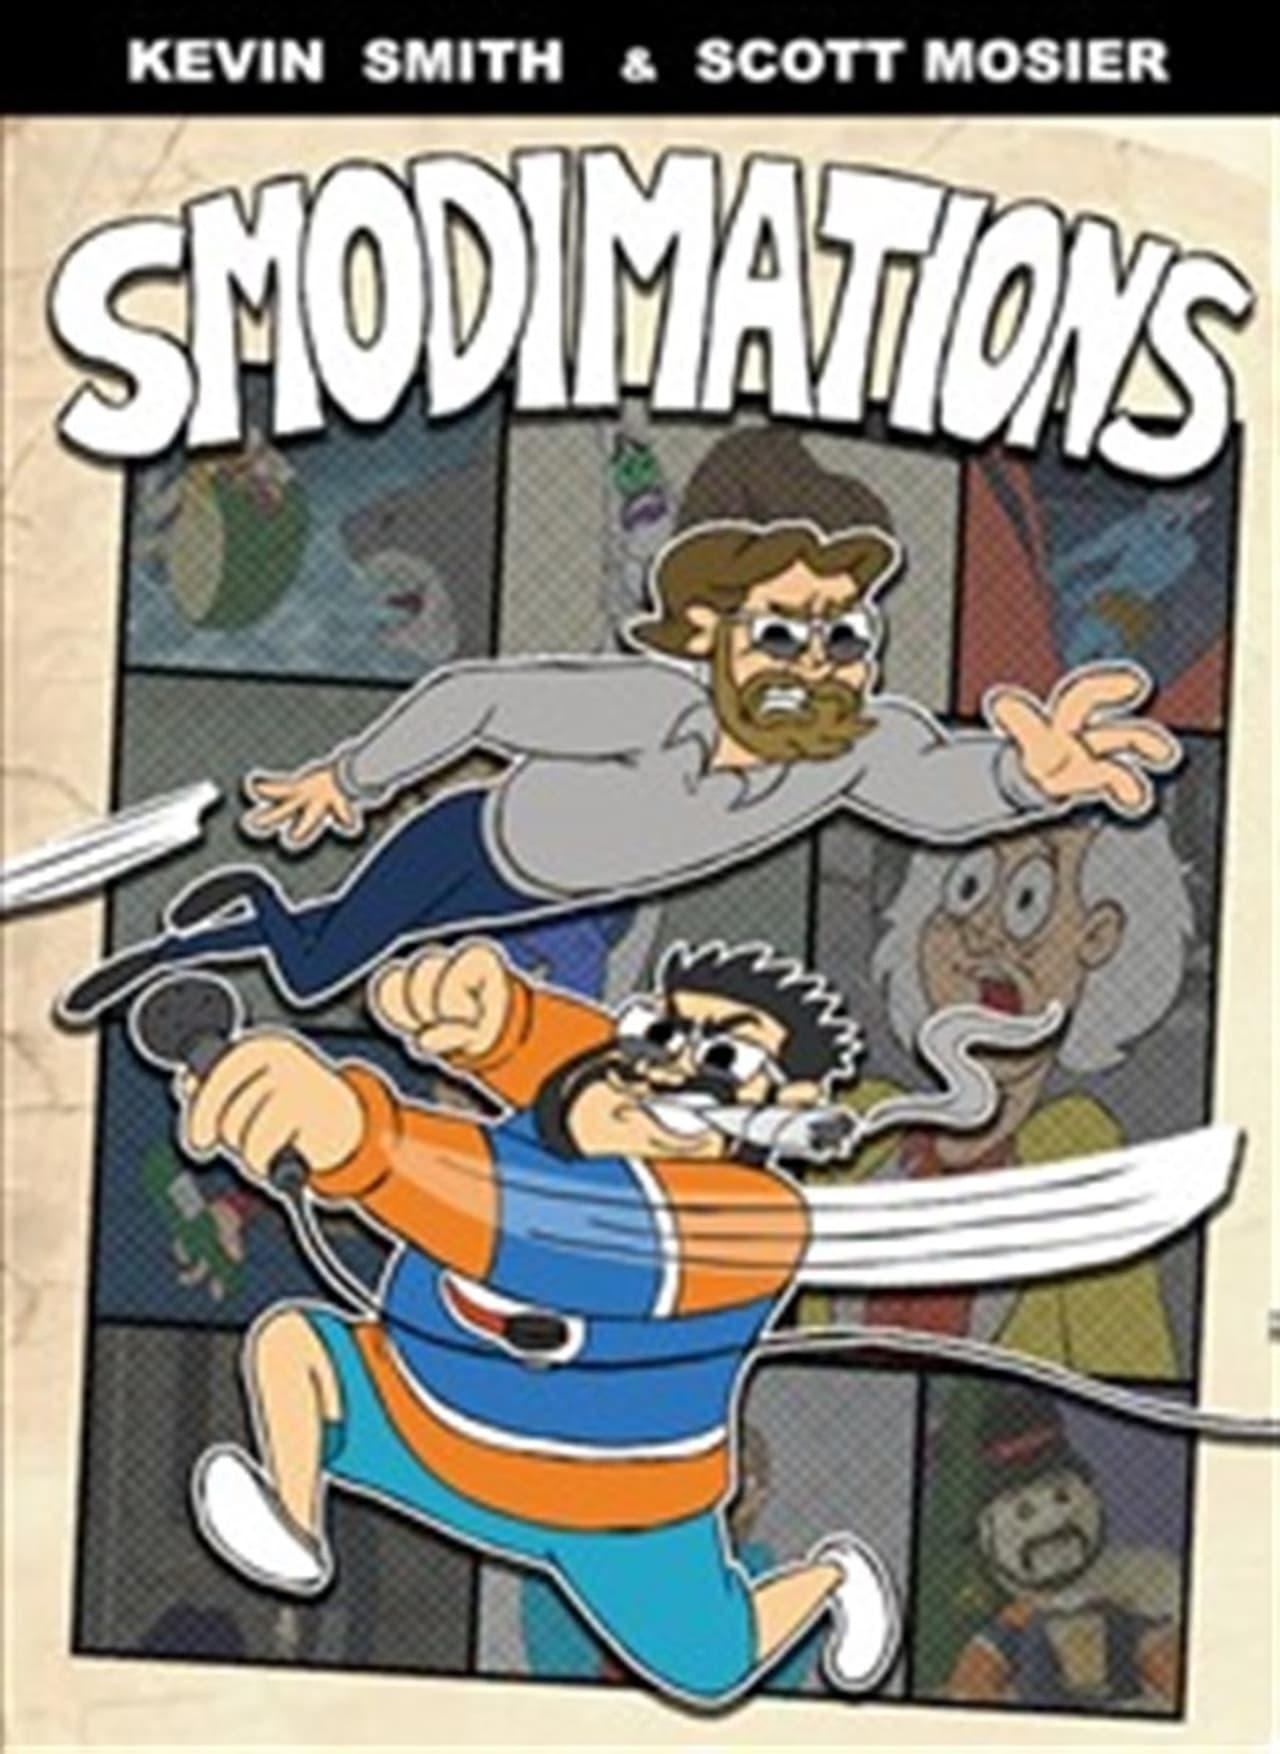 Kevin Smith: Smodimations poster